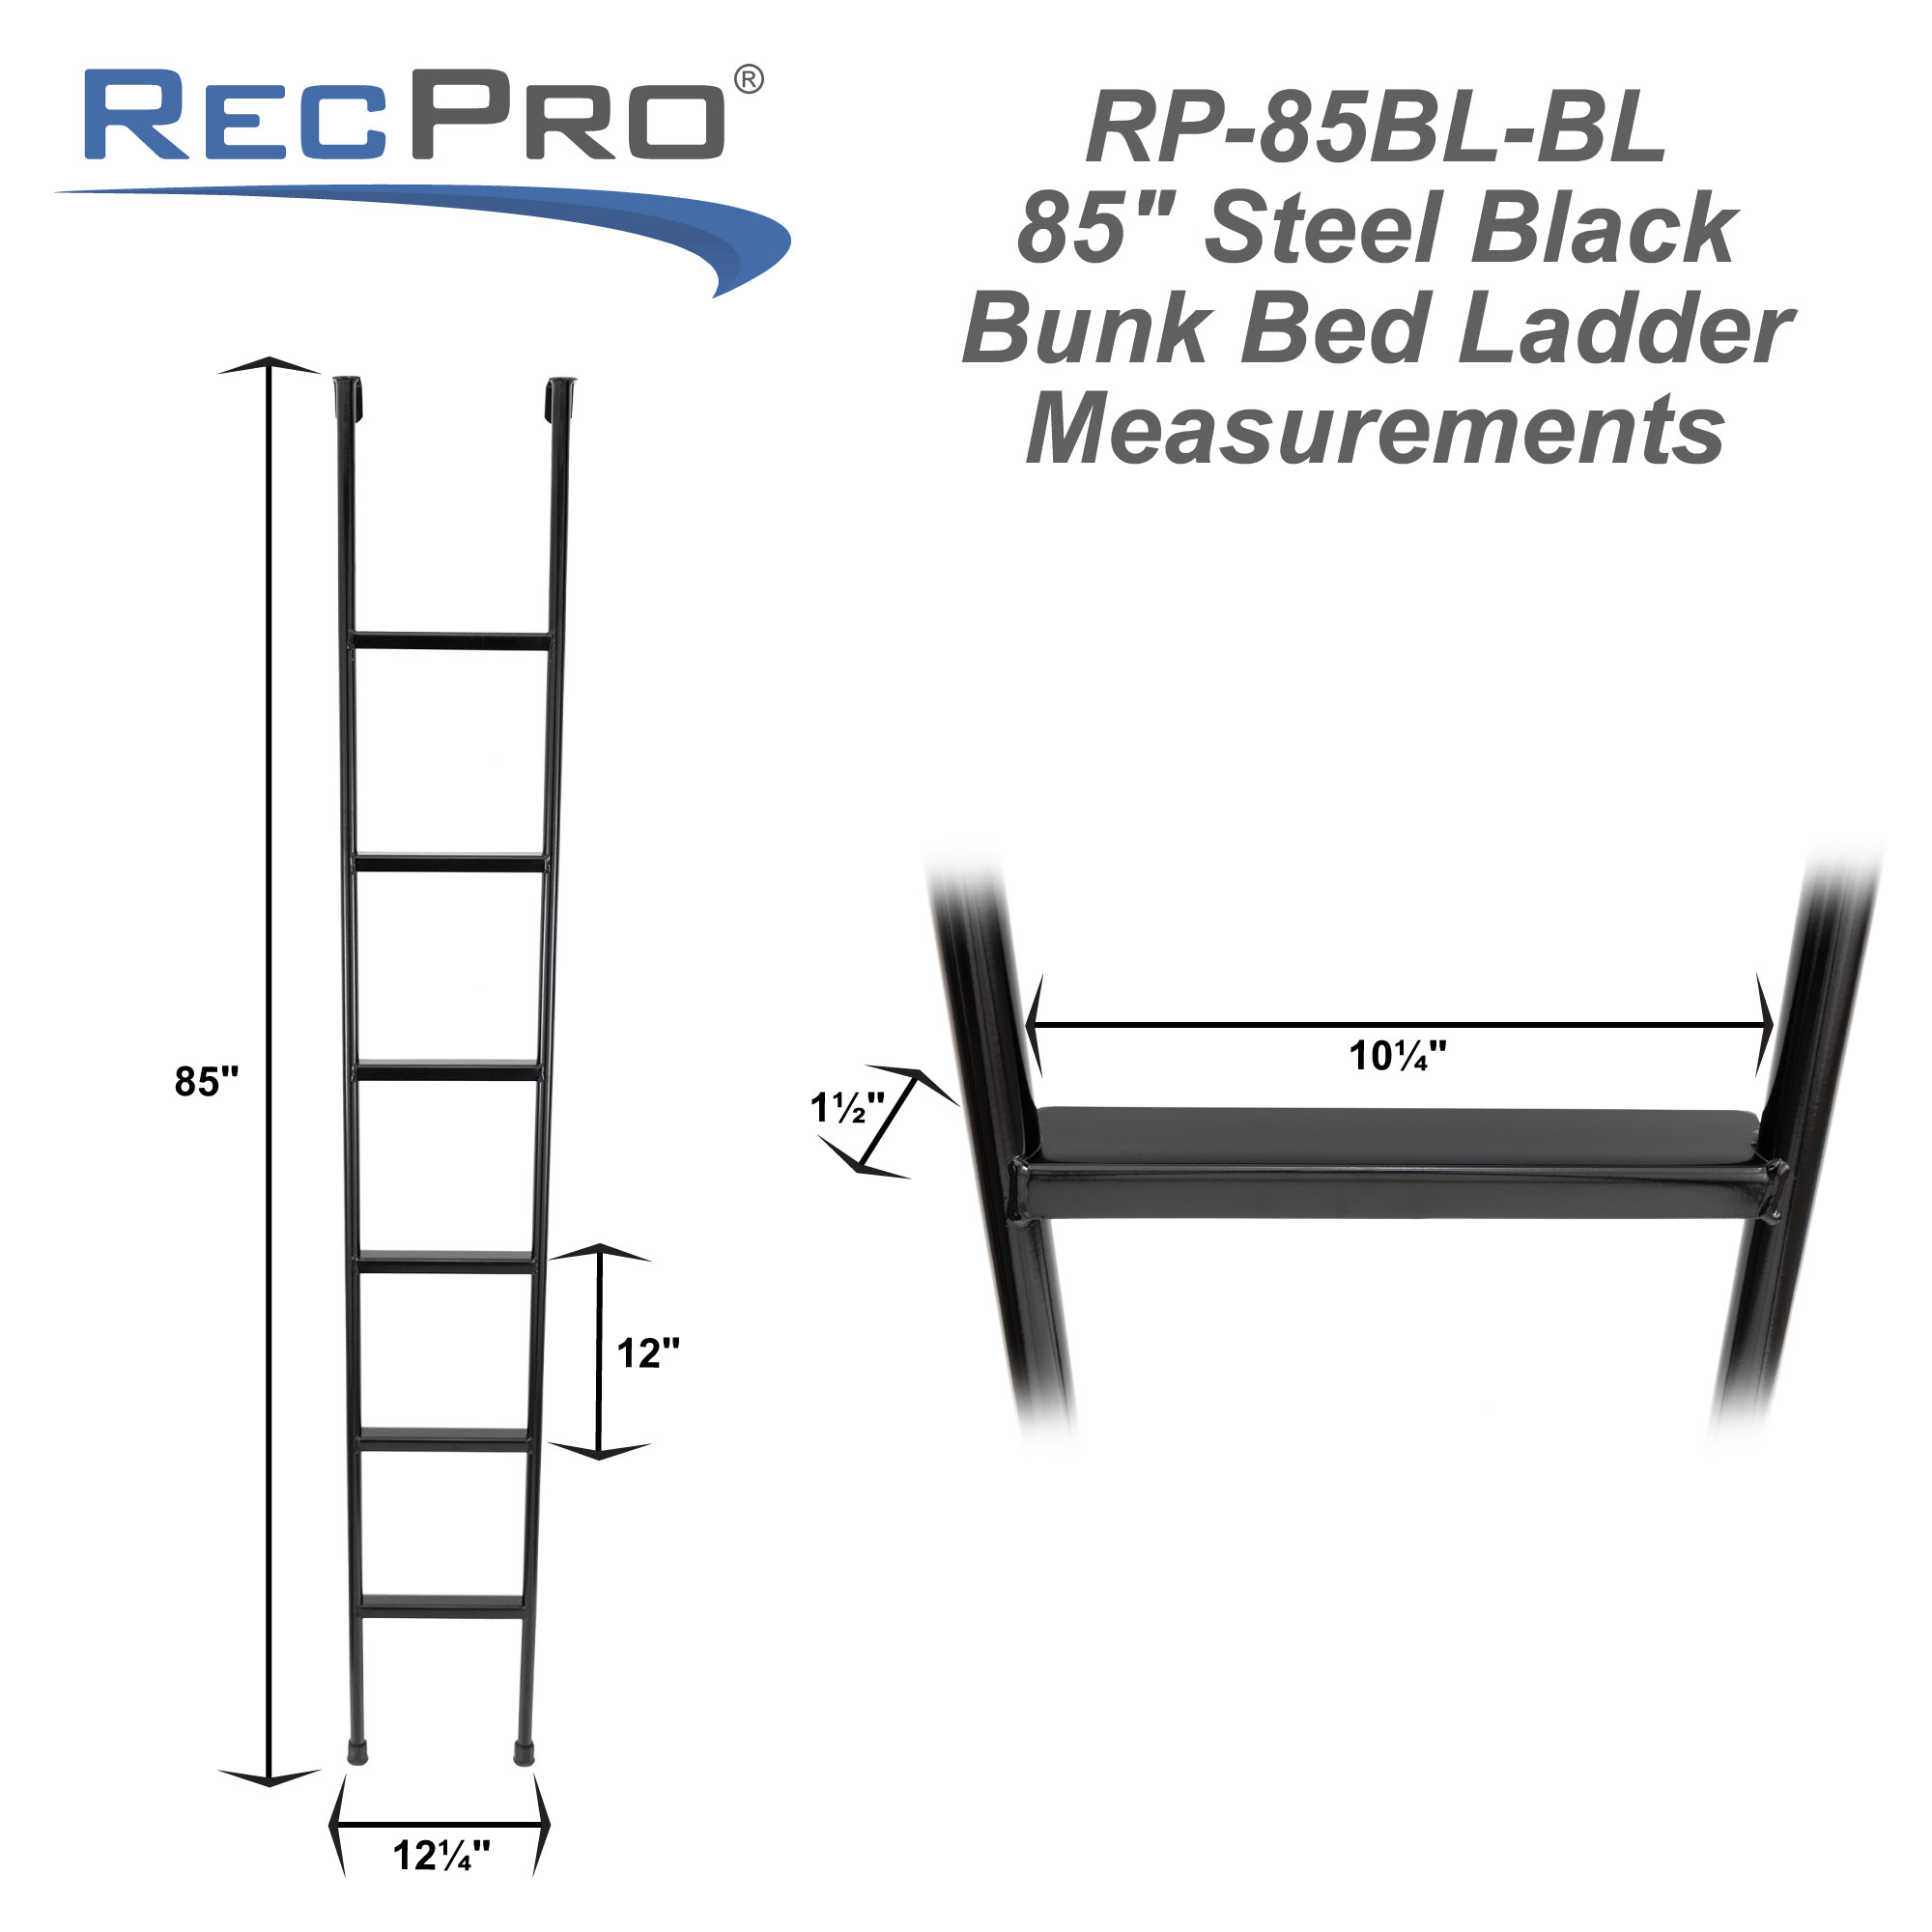 RV Bunk Bed Ladder 85 Tall Made in USA - RecPro